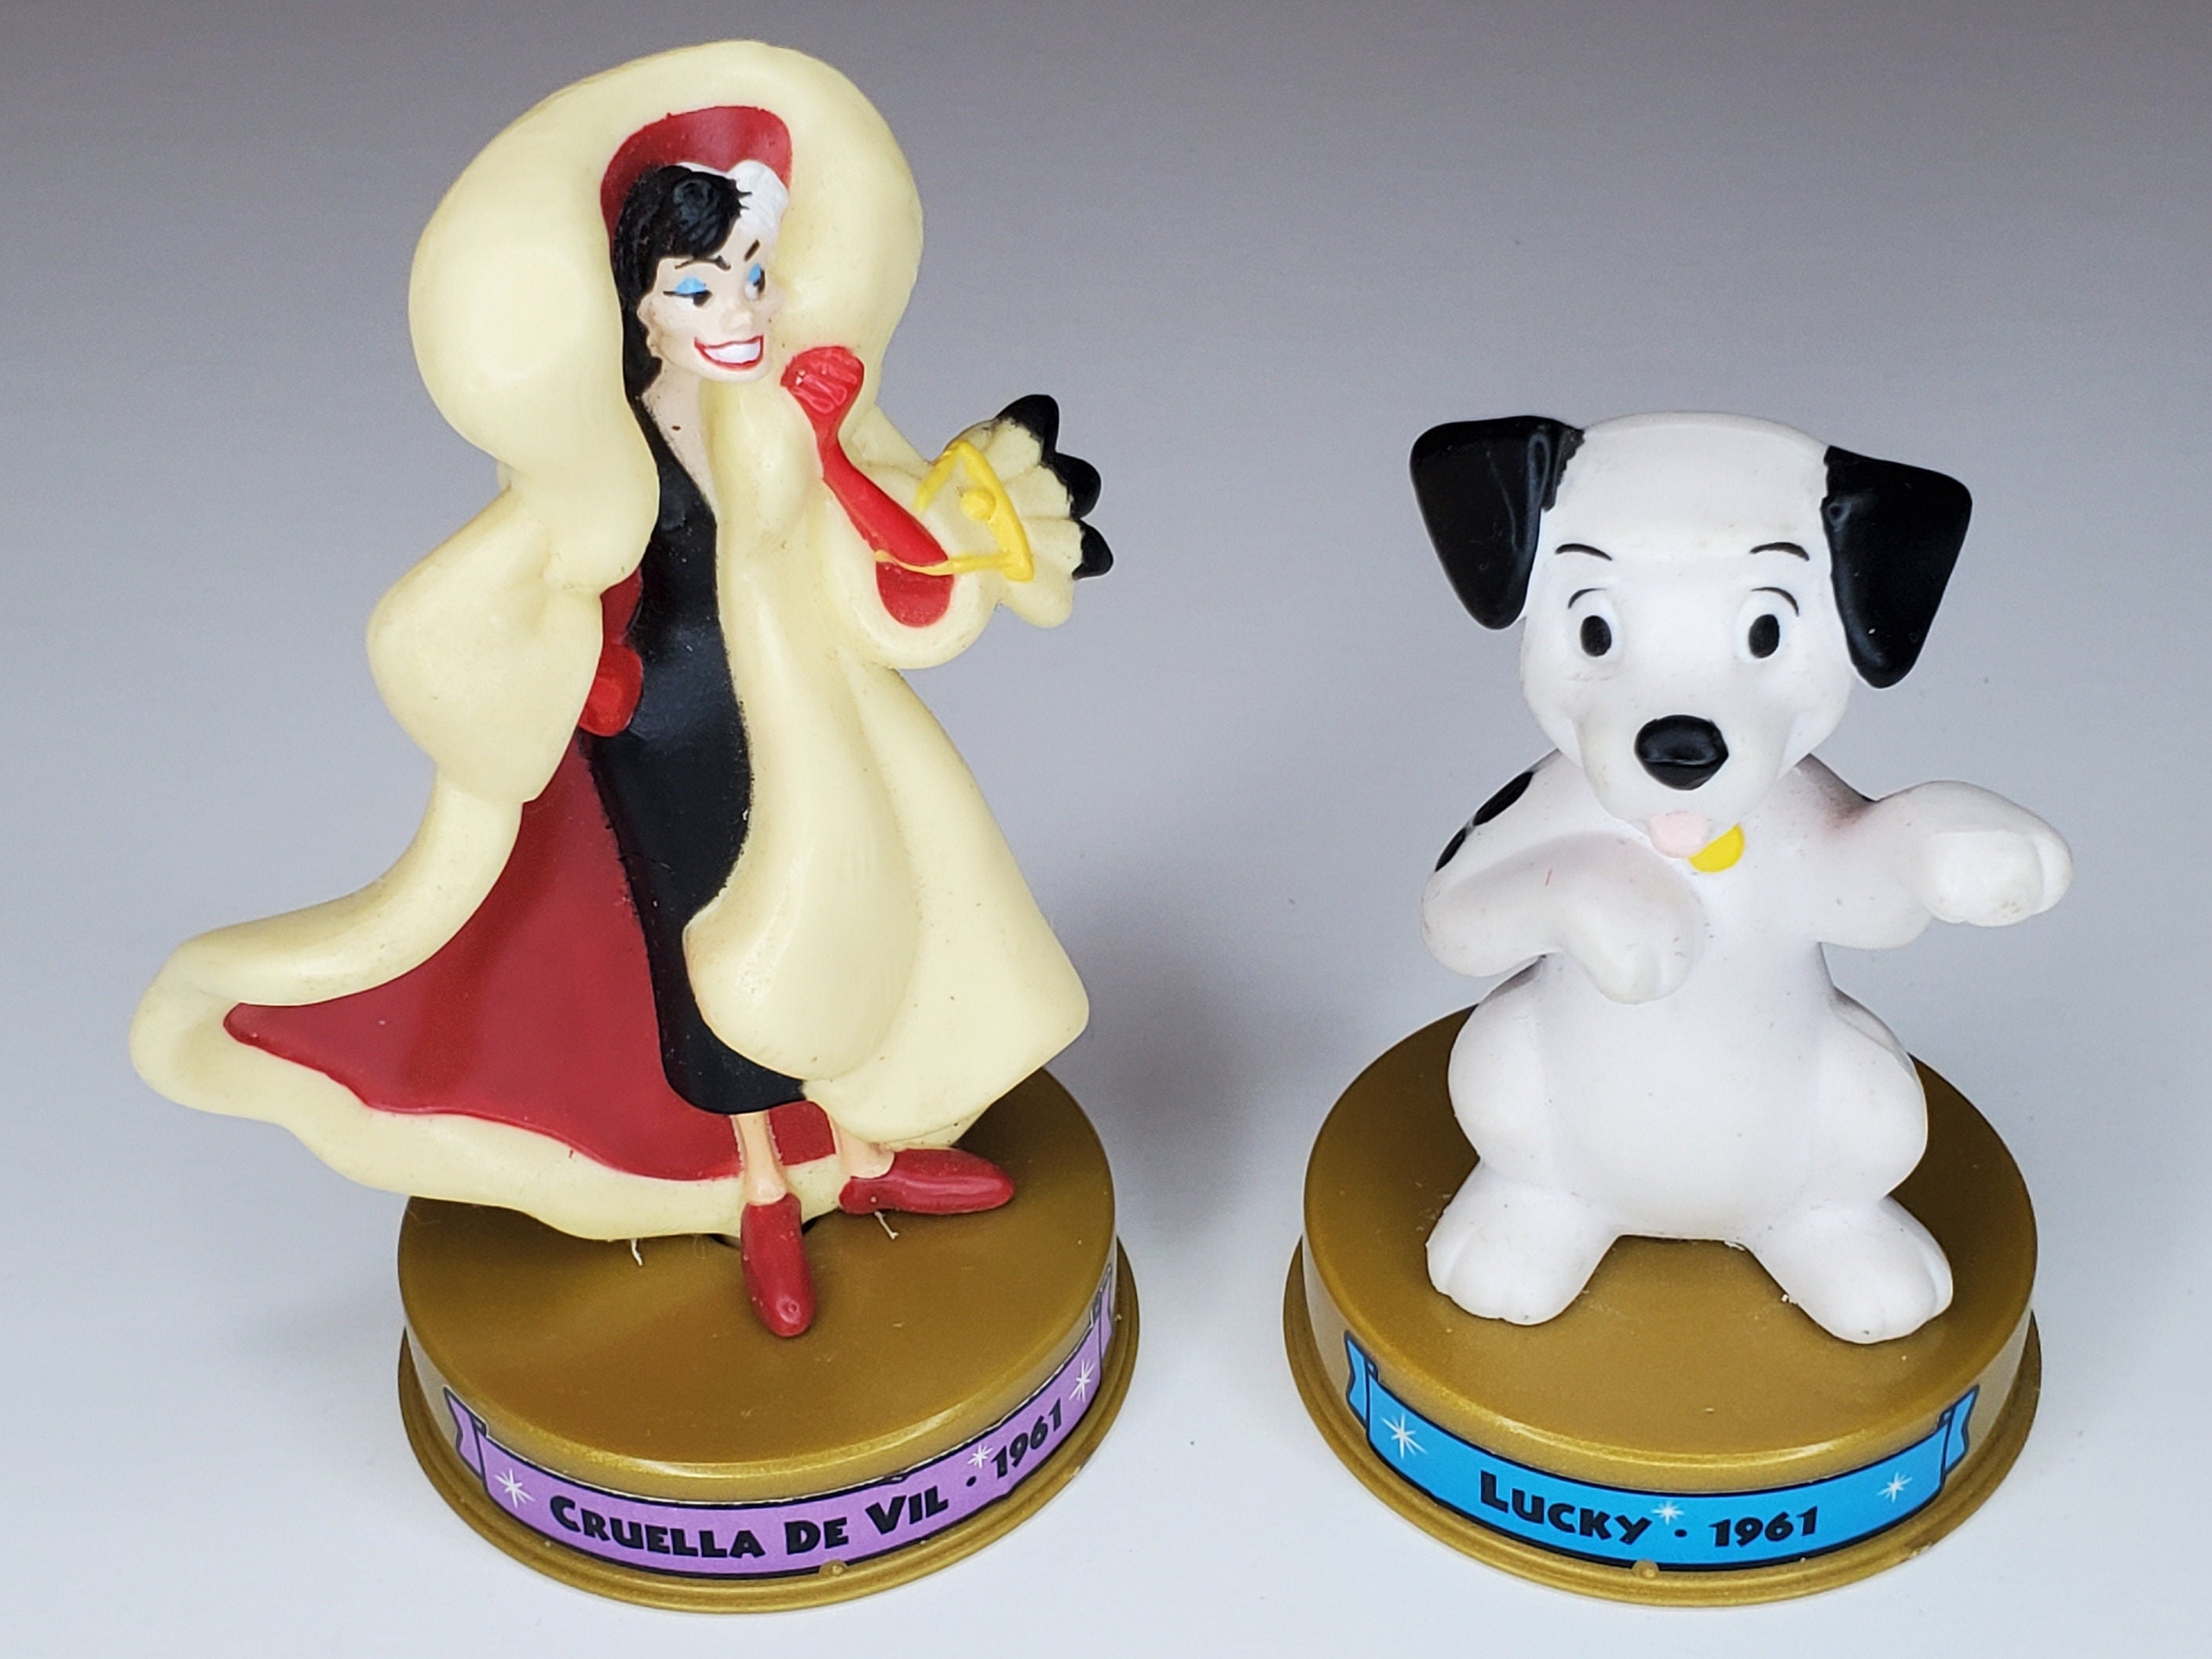 Alice in Wonderland Figurines Mad Hatter Cheshire Cat White Rabbit Disney's  100 Years of Magic Celebration Mcdonald's Happy Meal Cake Topper 